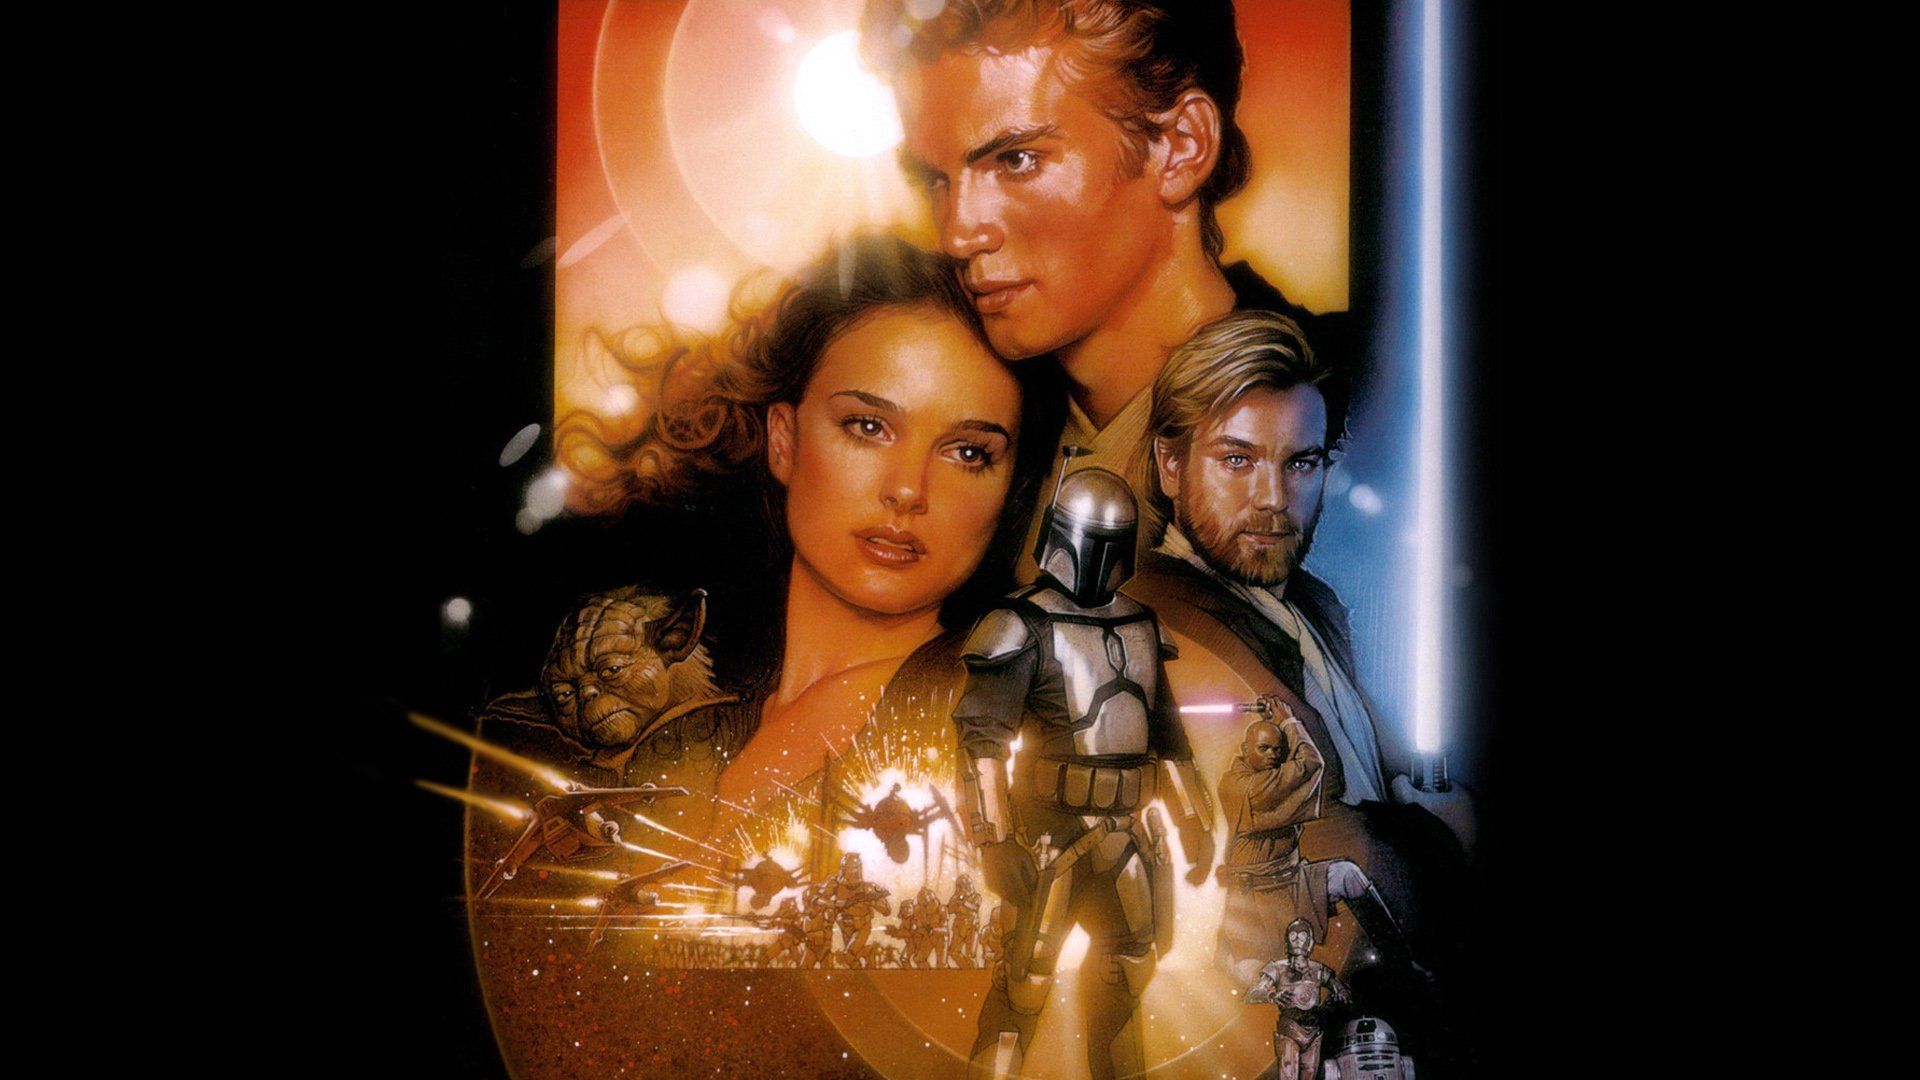 Attack of the Clones Wallpaper Free Attack of the Clones Background